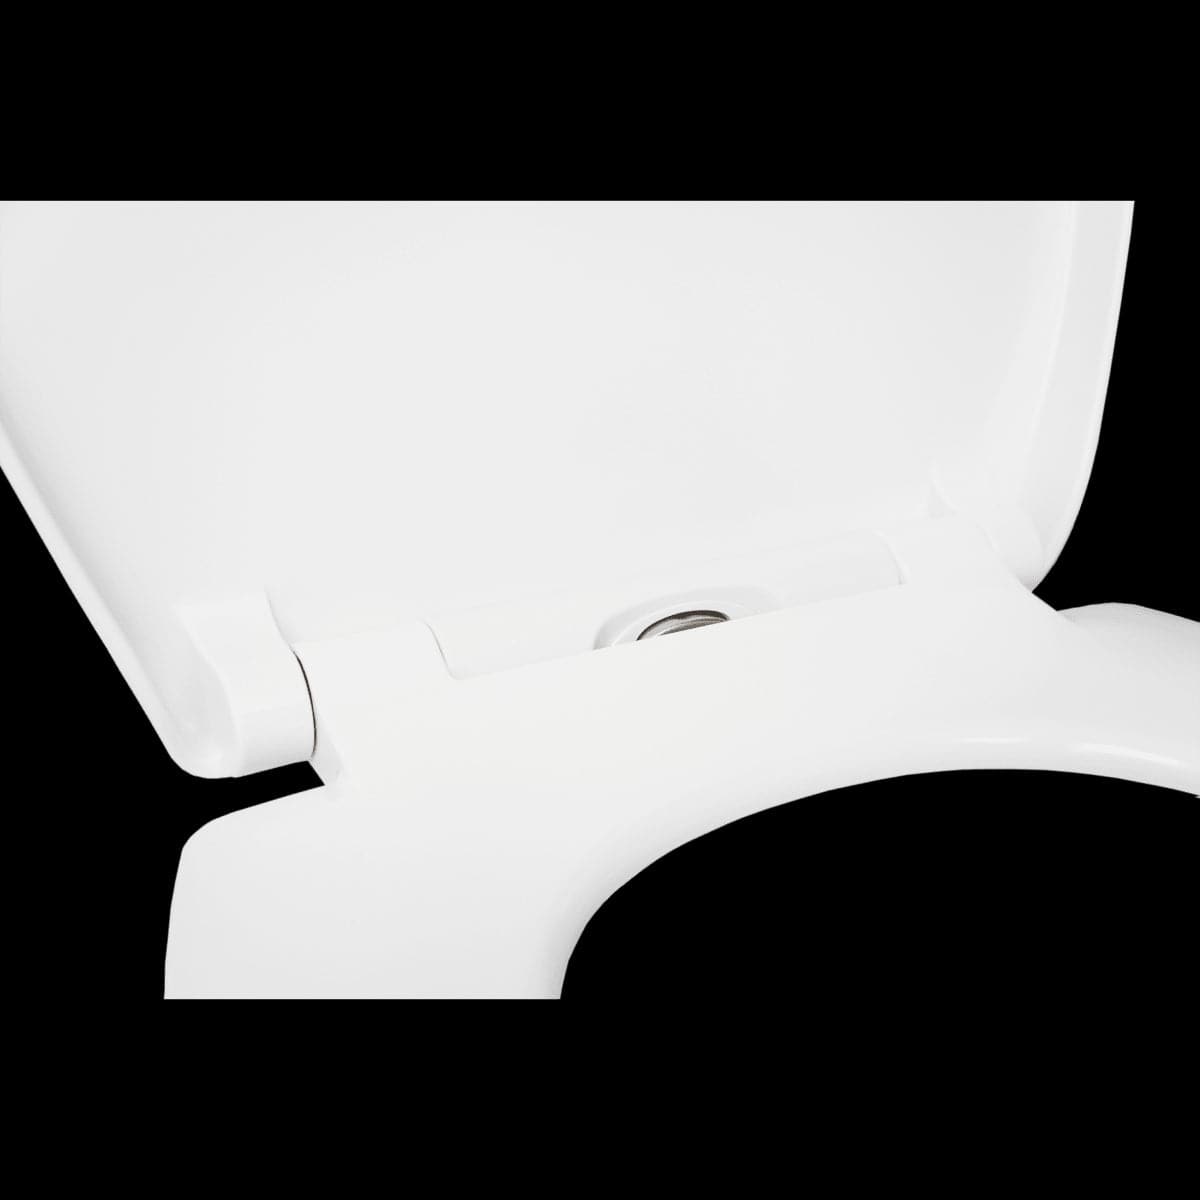 WC SEAT REMIX OVAL WHITE - METAL HINGES - SLOW CLOSING - TOP FIX - best price from Maltashopper.com BR430007080